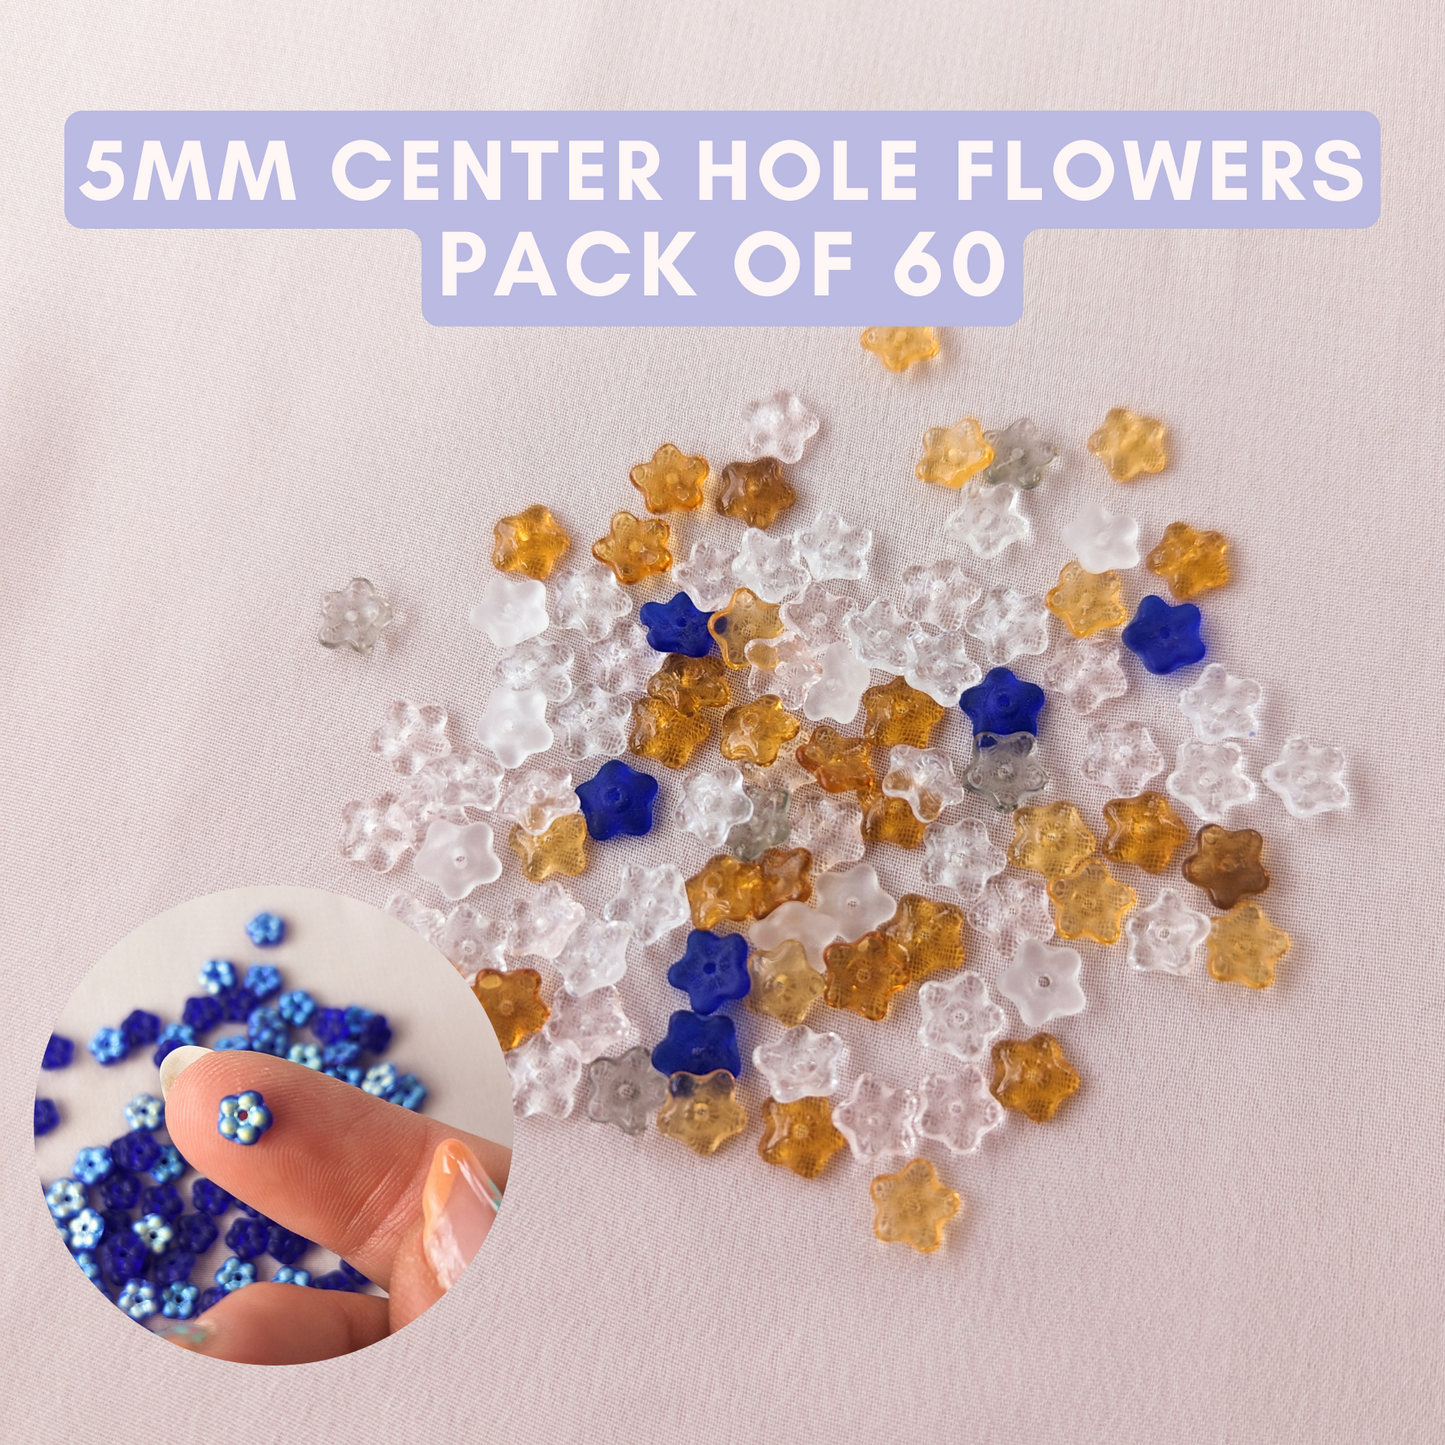 Flowers - Sunny Day Mix - 5mm with Center Hole